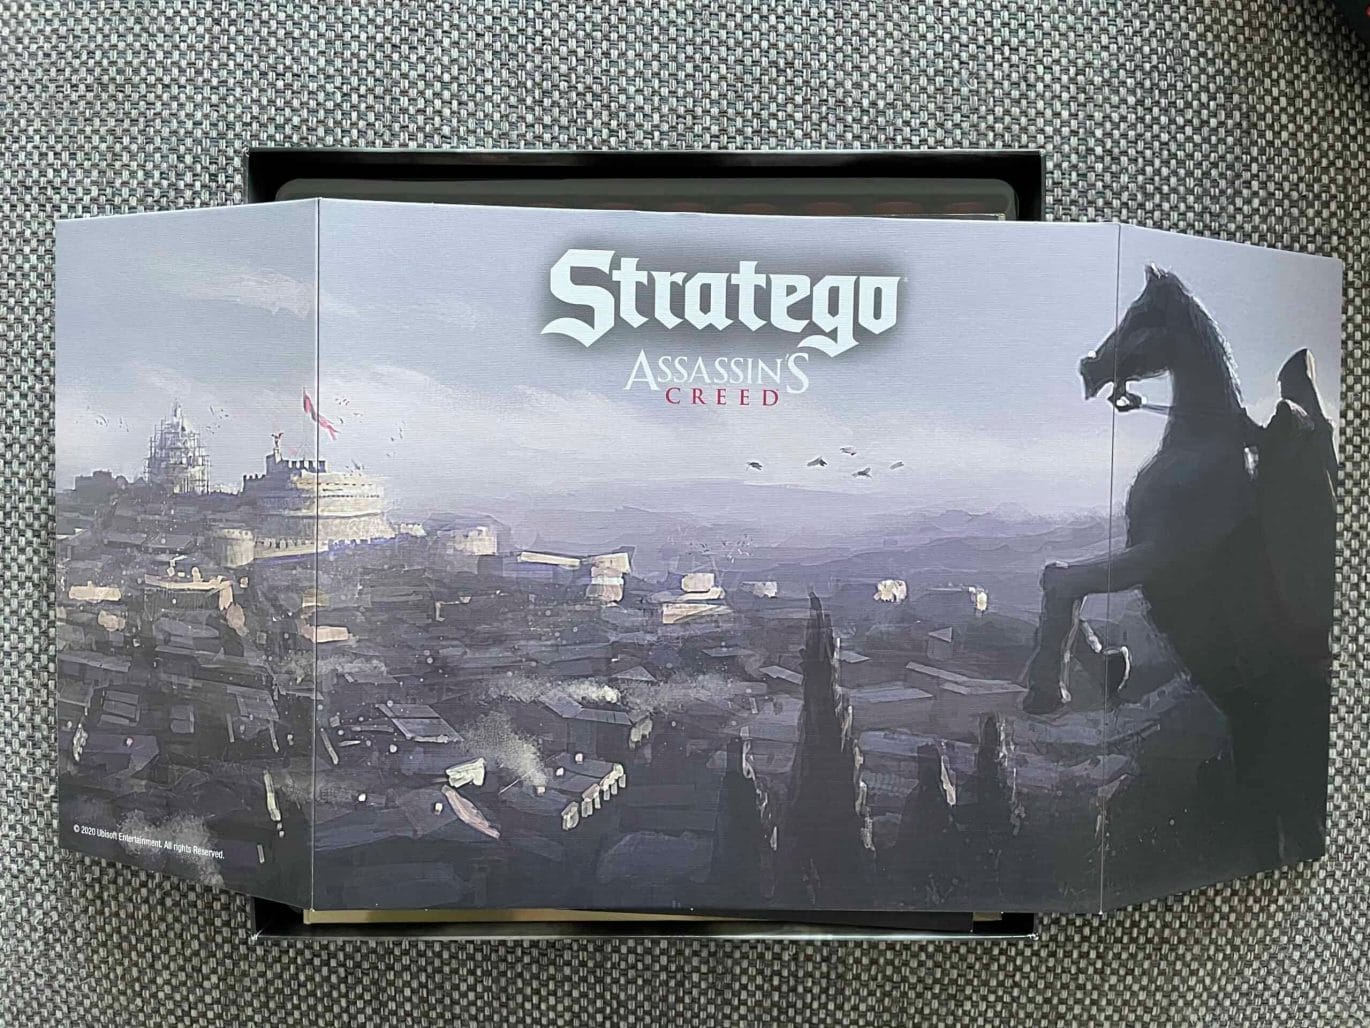 Stratego meets Assassin’s Creed feature